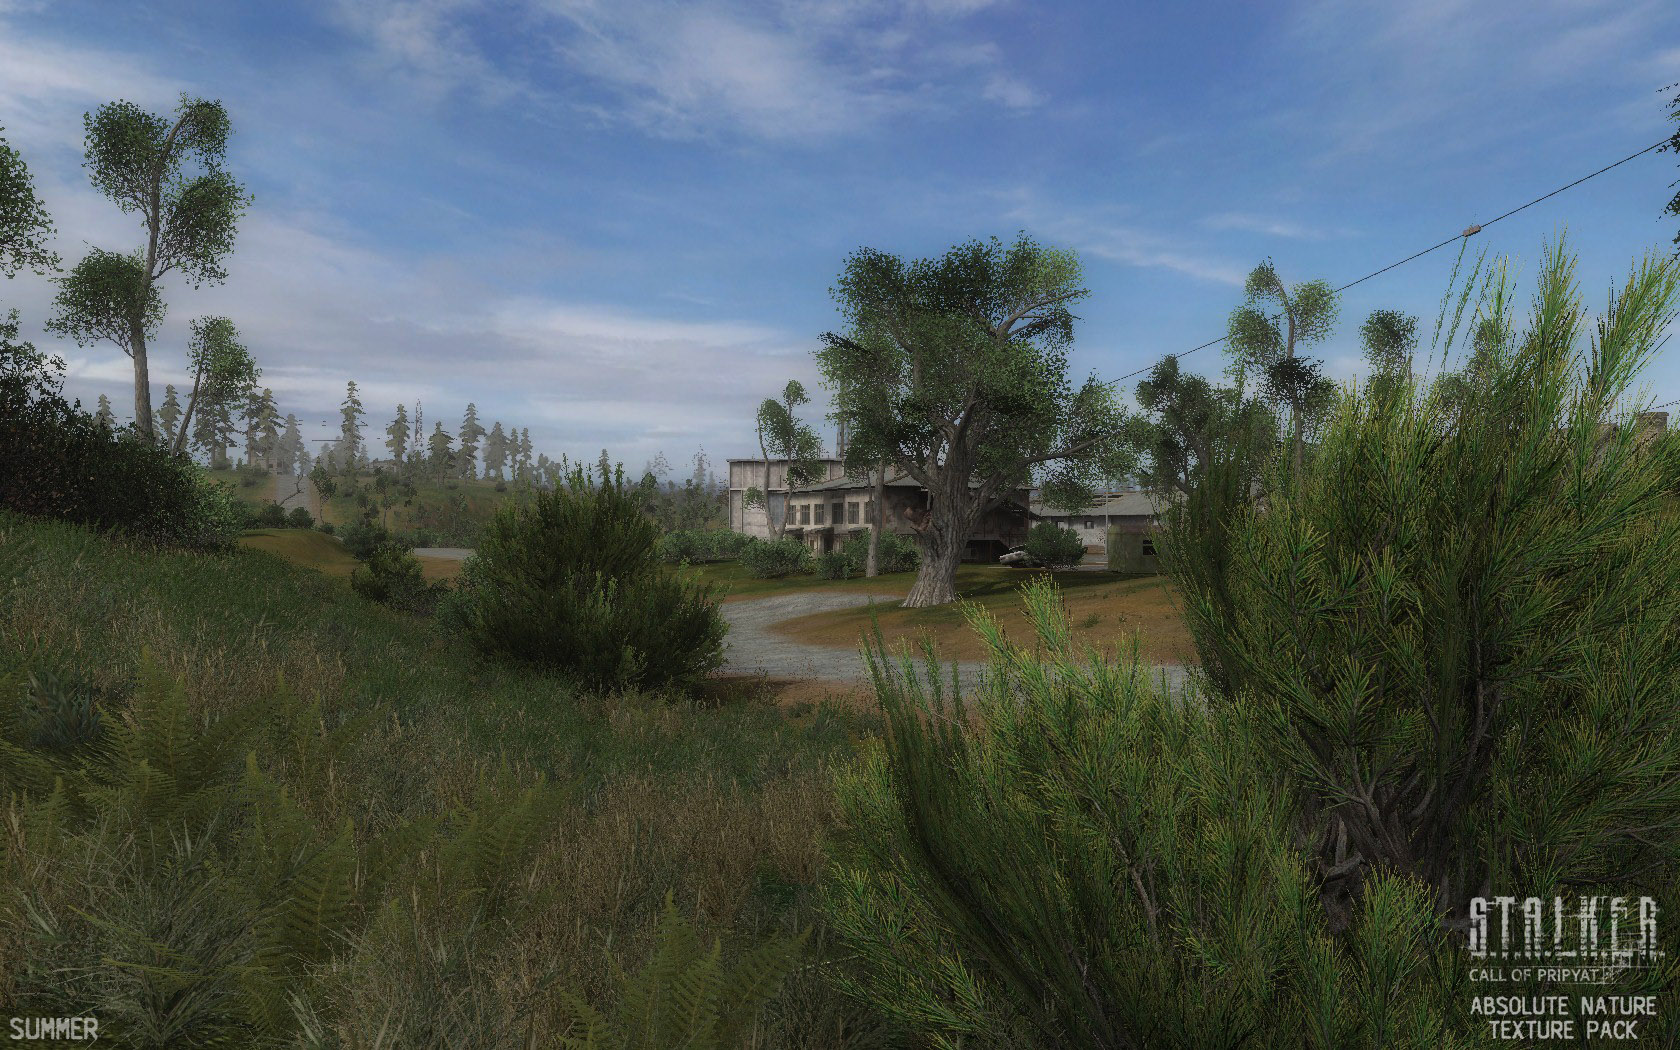 Absolute Nature Texture Pack 1.3 update image - AtmosFear for Call Pripyat mod for S.T.A.L.K.E.R.: Call of Pripyat - DB